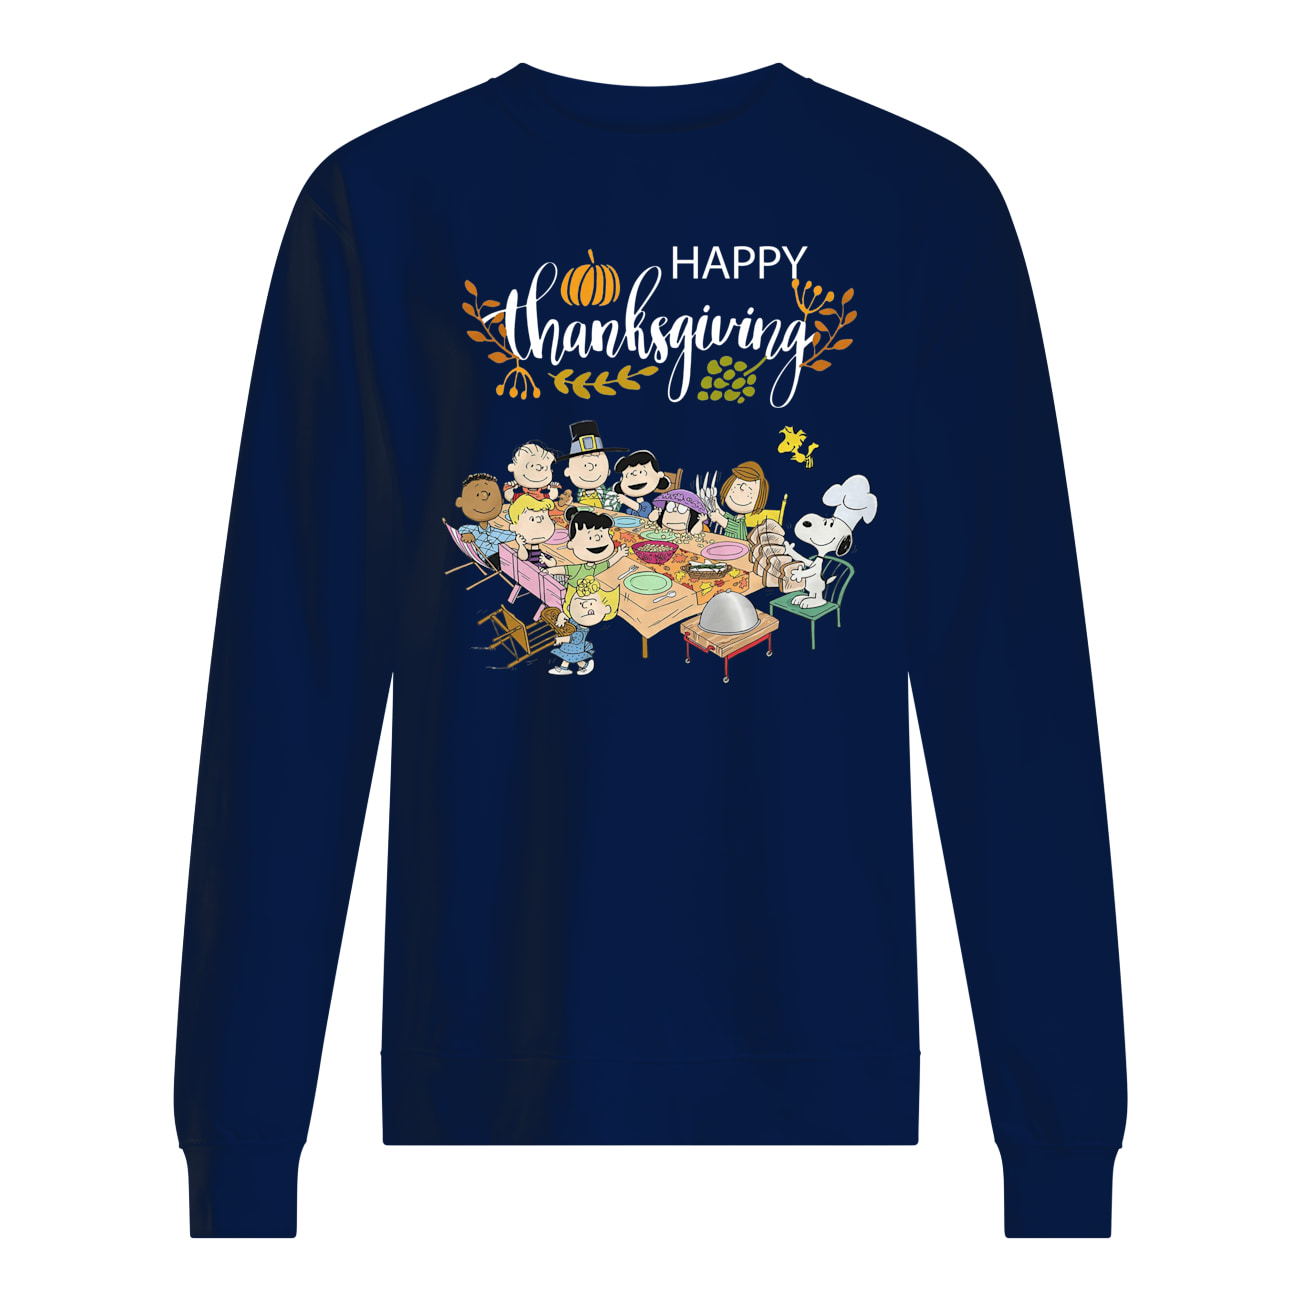 Snoopy and friends happy thanksgiving sweatshirt